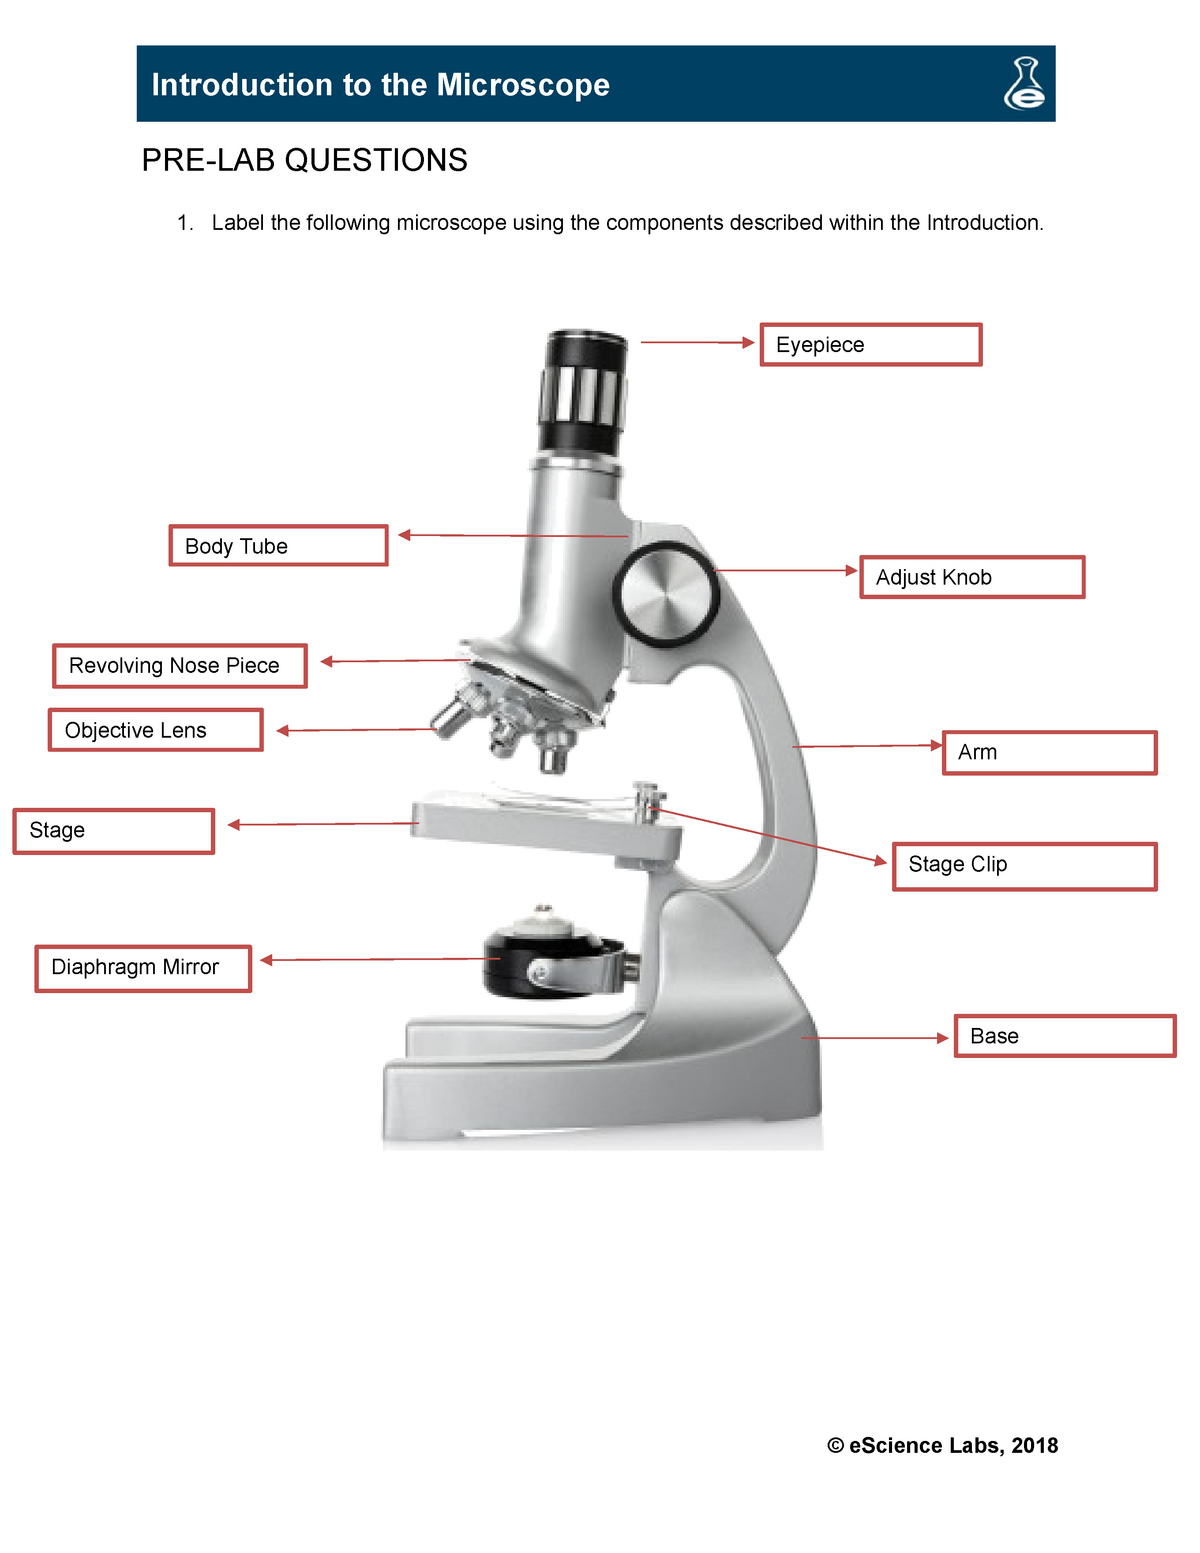 e-science-microscope-lab-pre-lab-questions-label-the-following-microscope-using-the